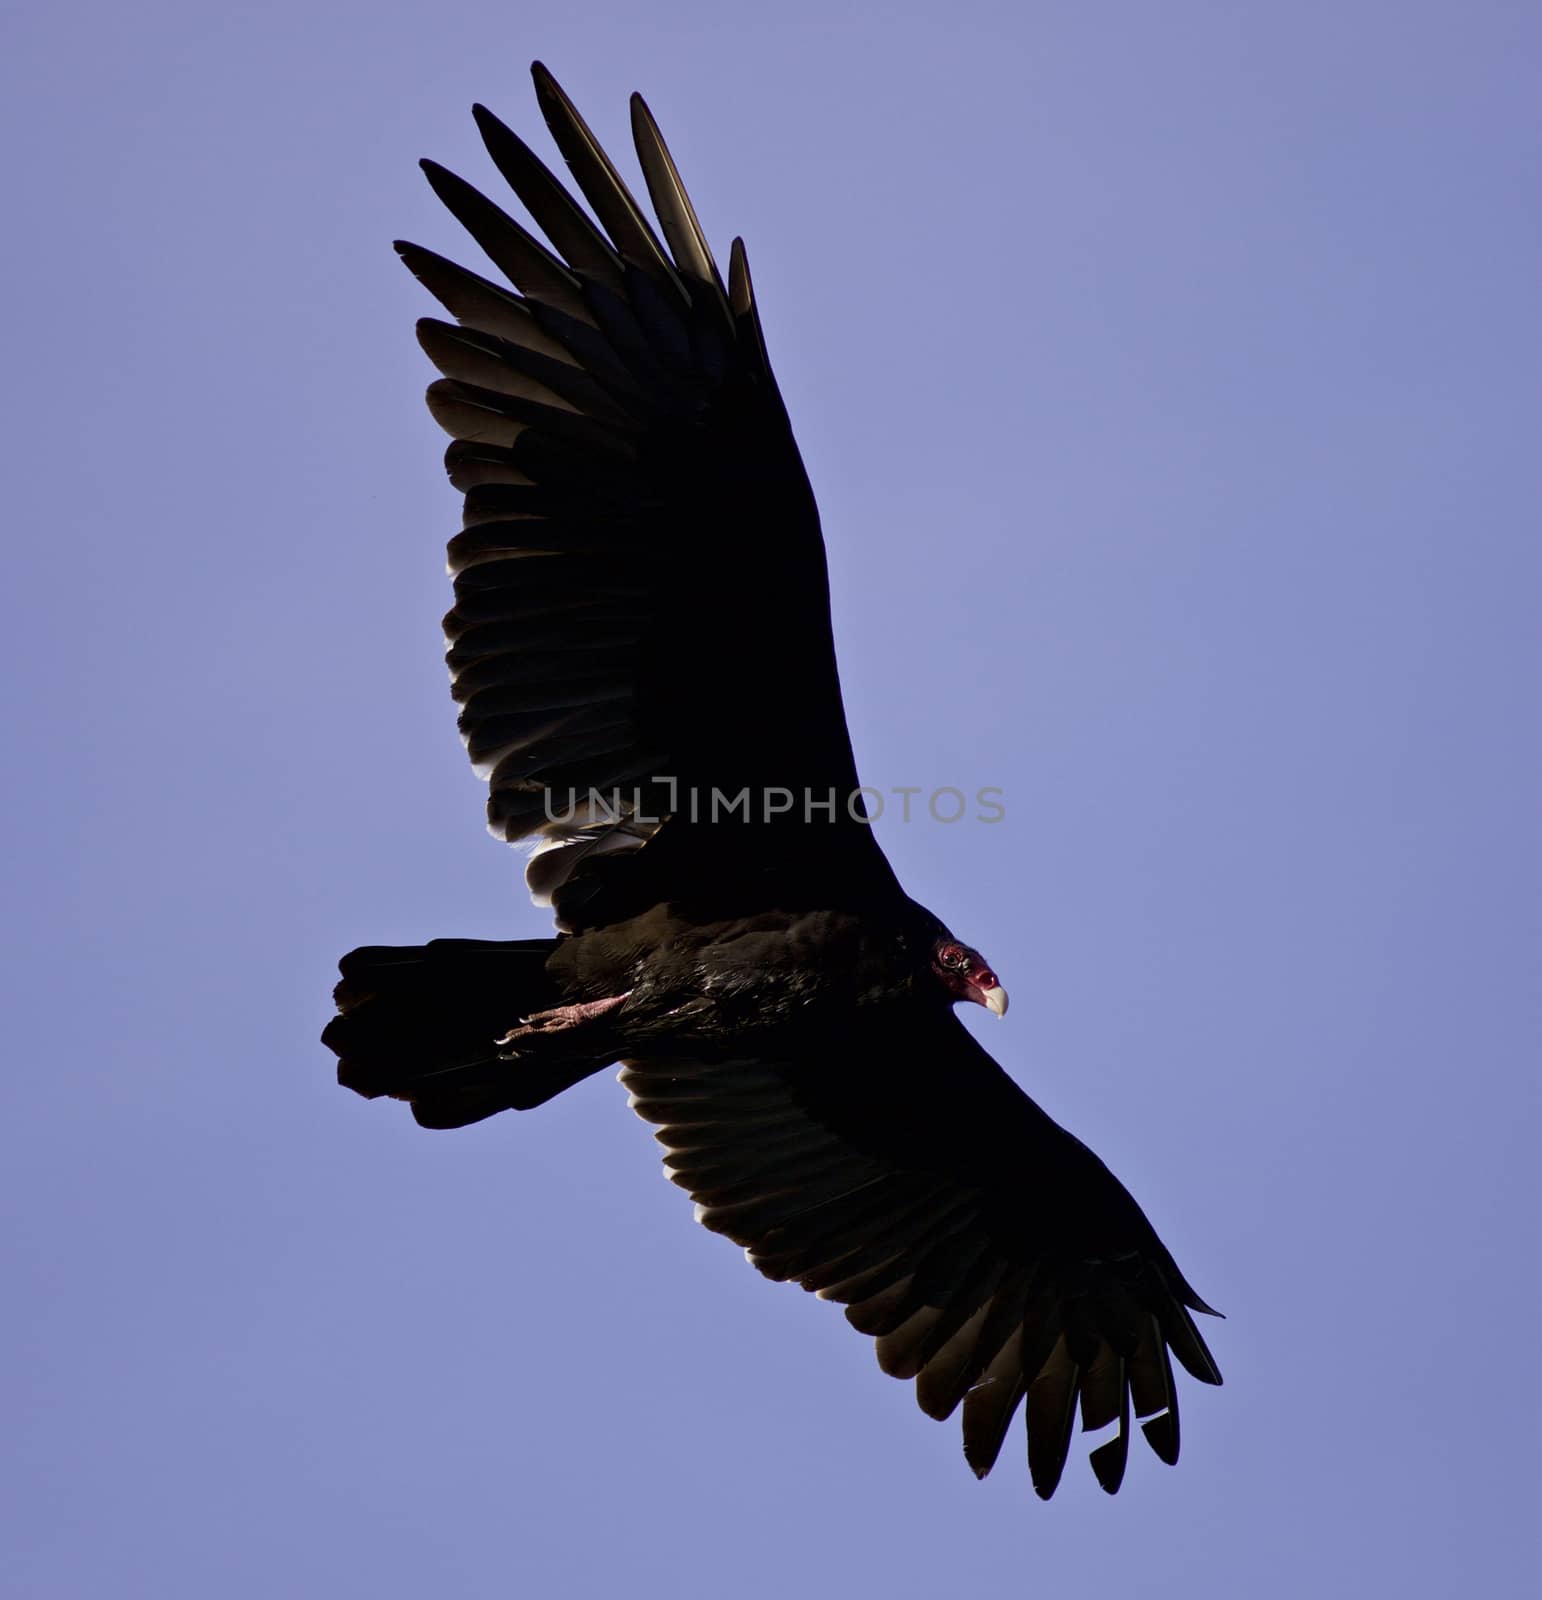 Isolated picture with a vulture flying in the sky